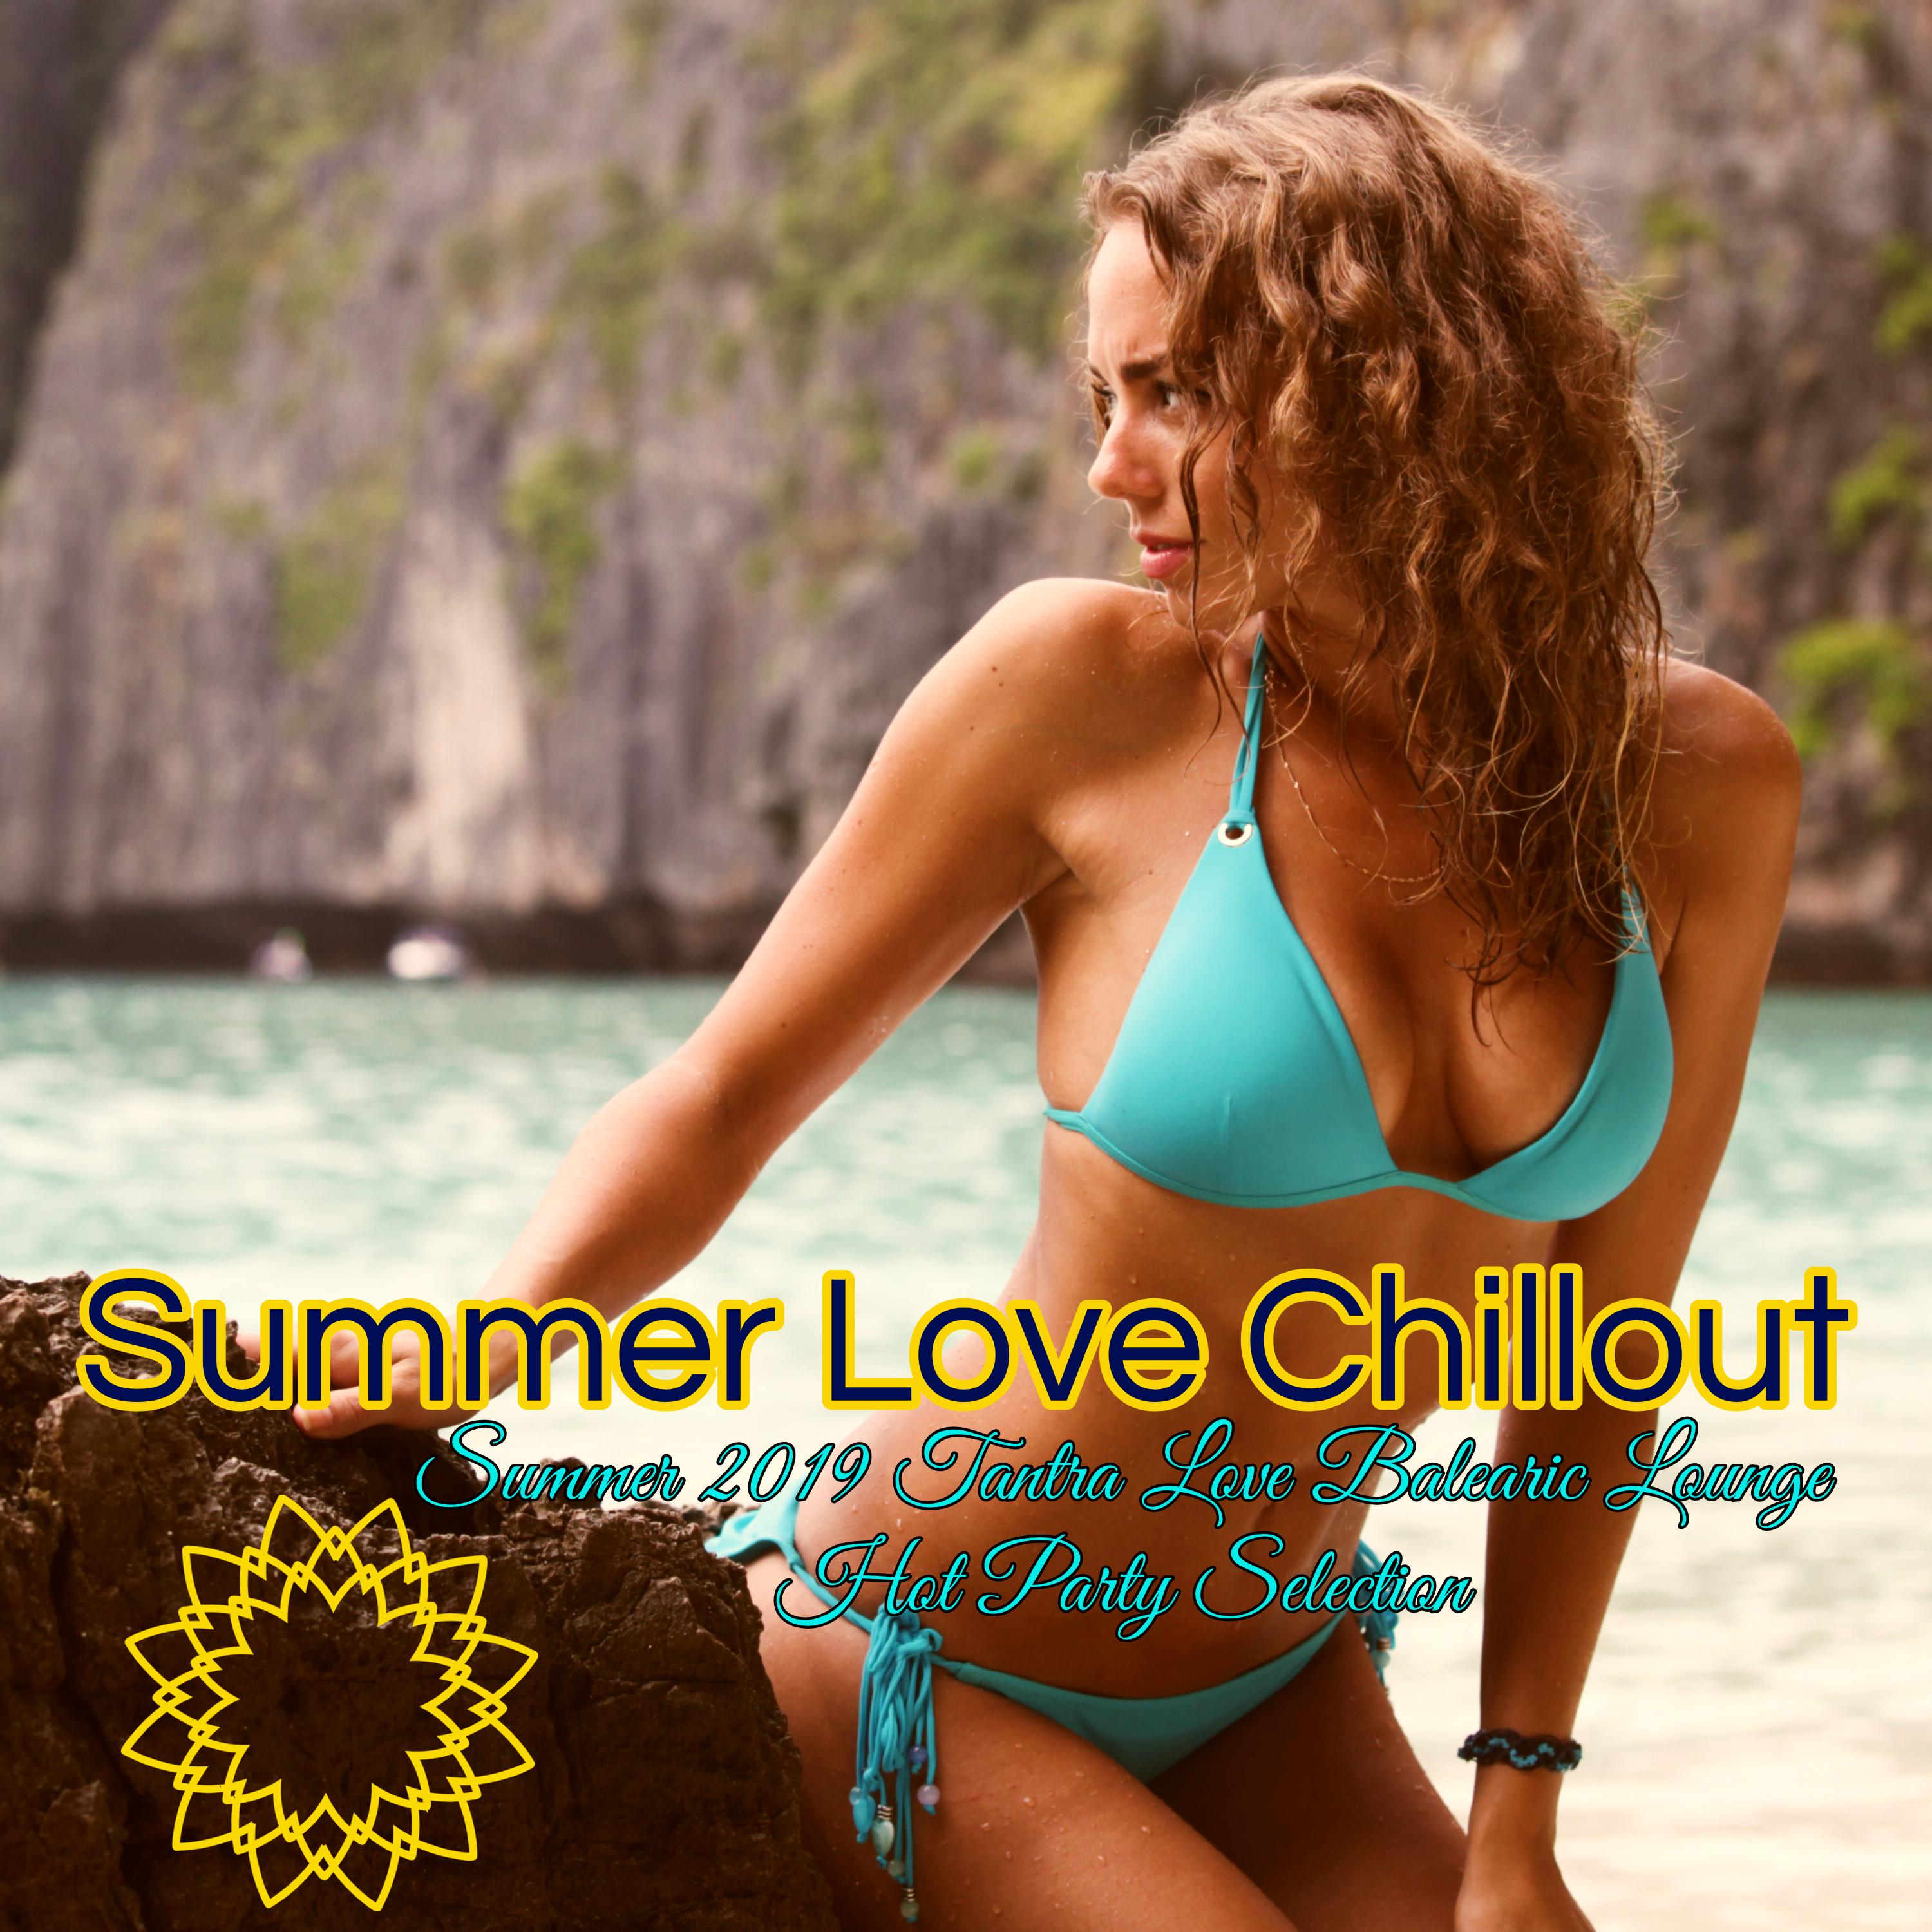 Summer Love Chillout